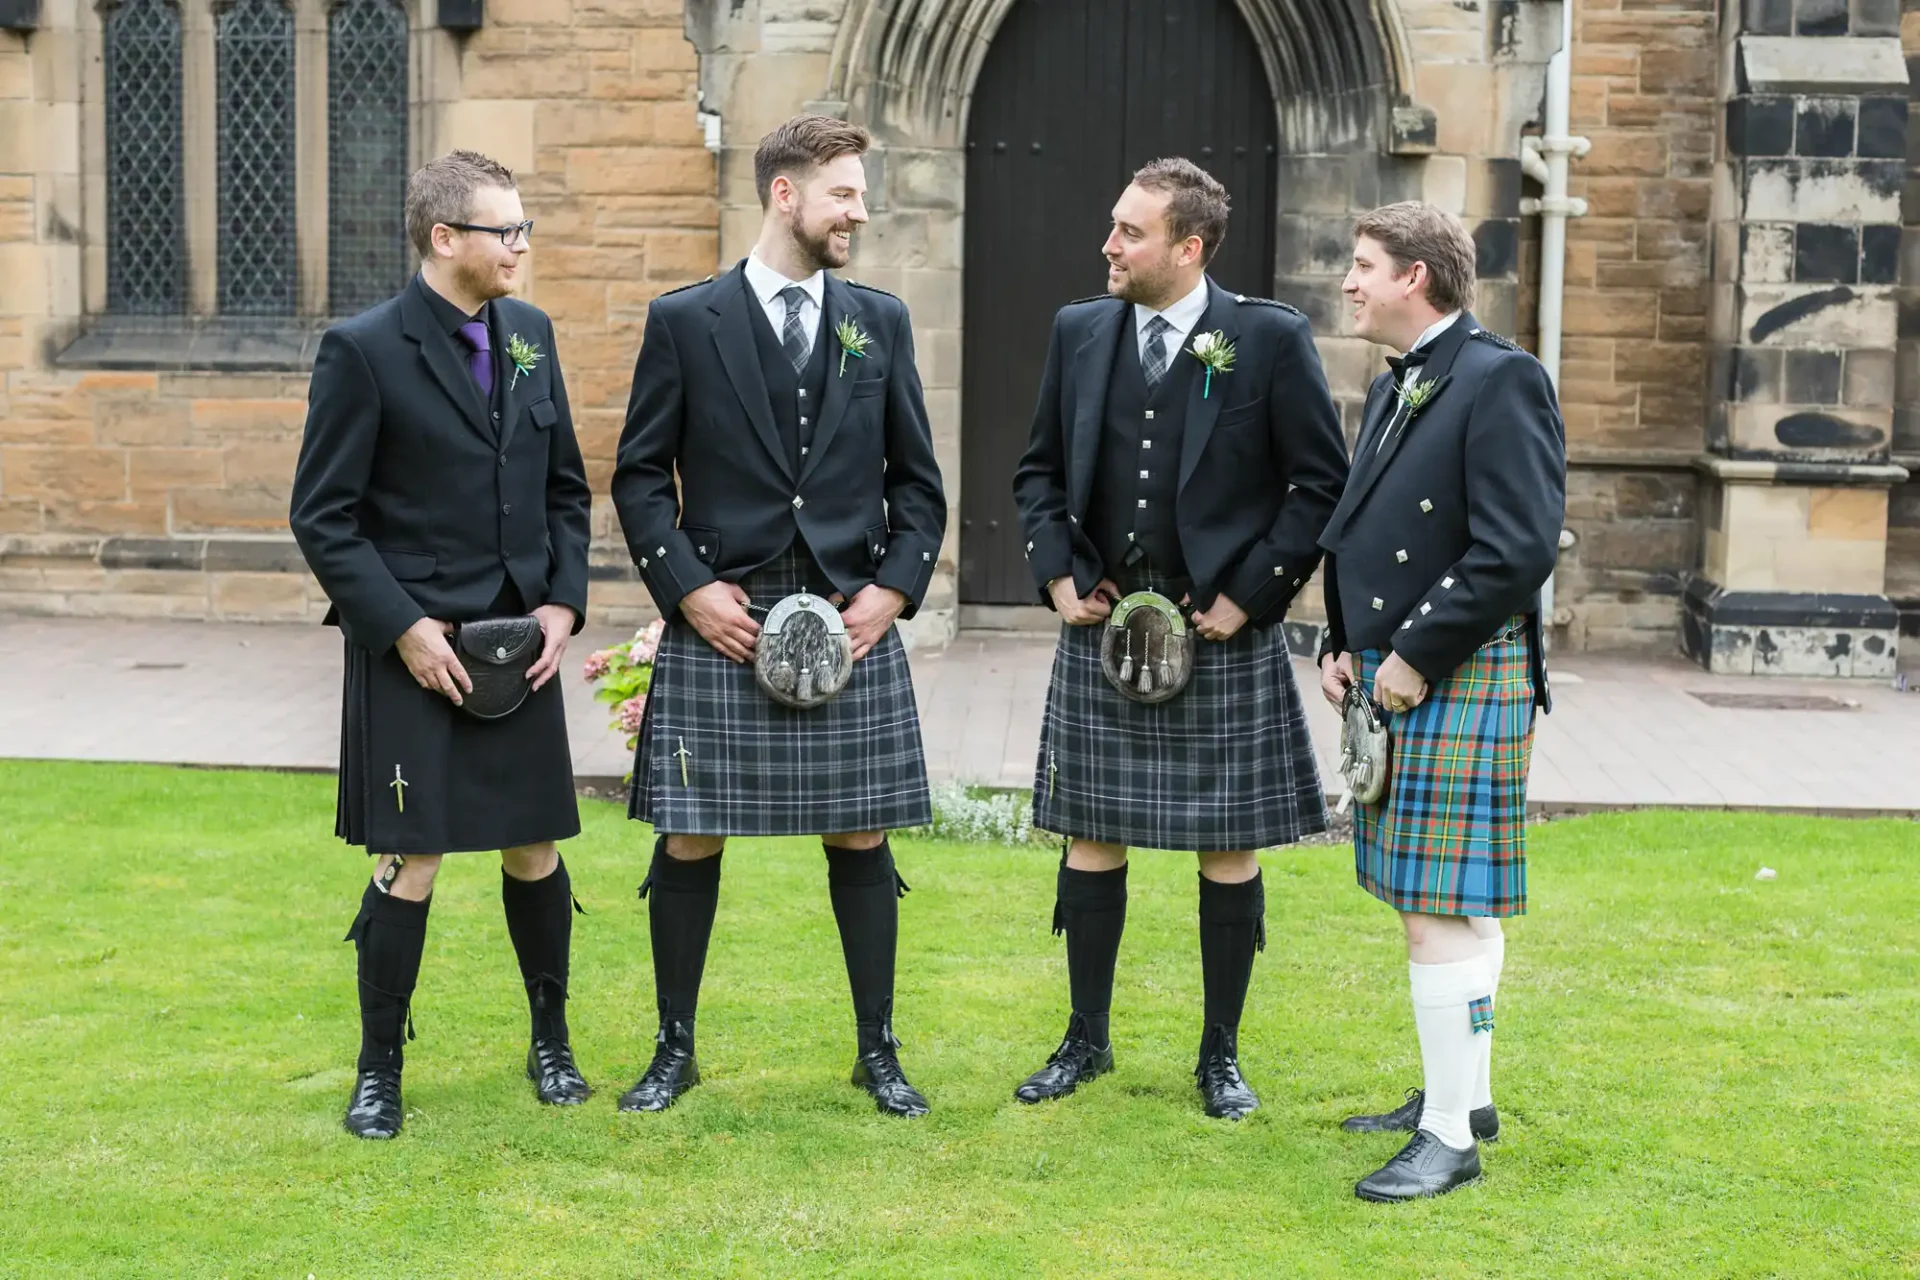 Four men in kilts and jackets, smiling and chatting outside a church, each holding a sporran.